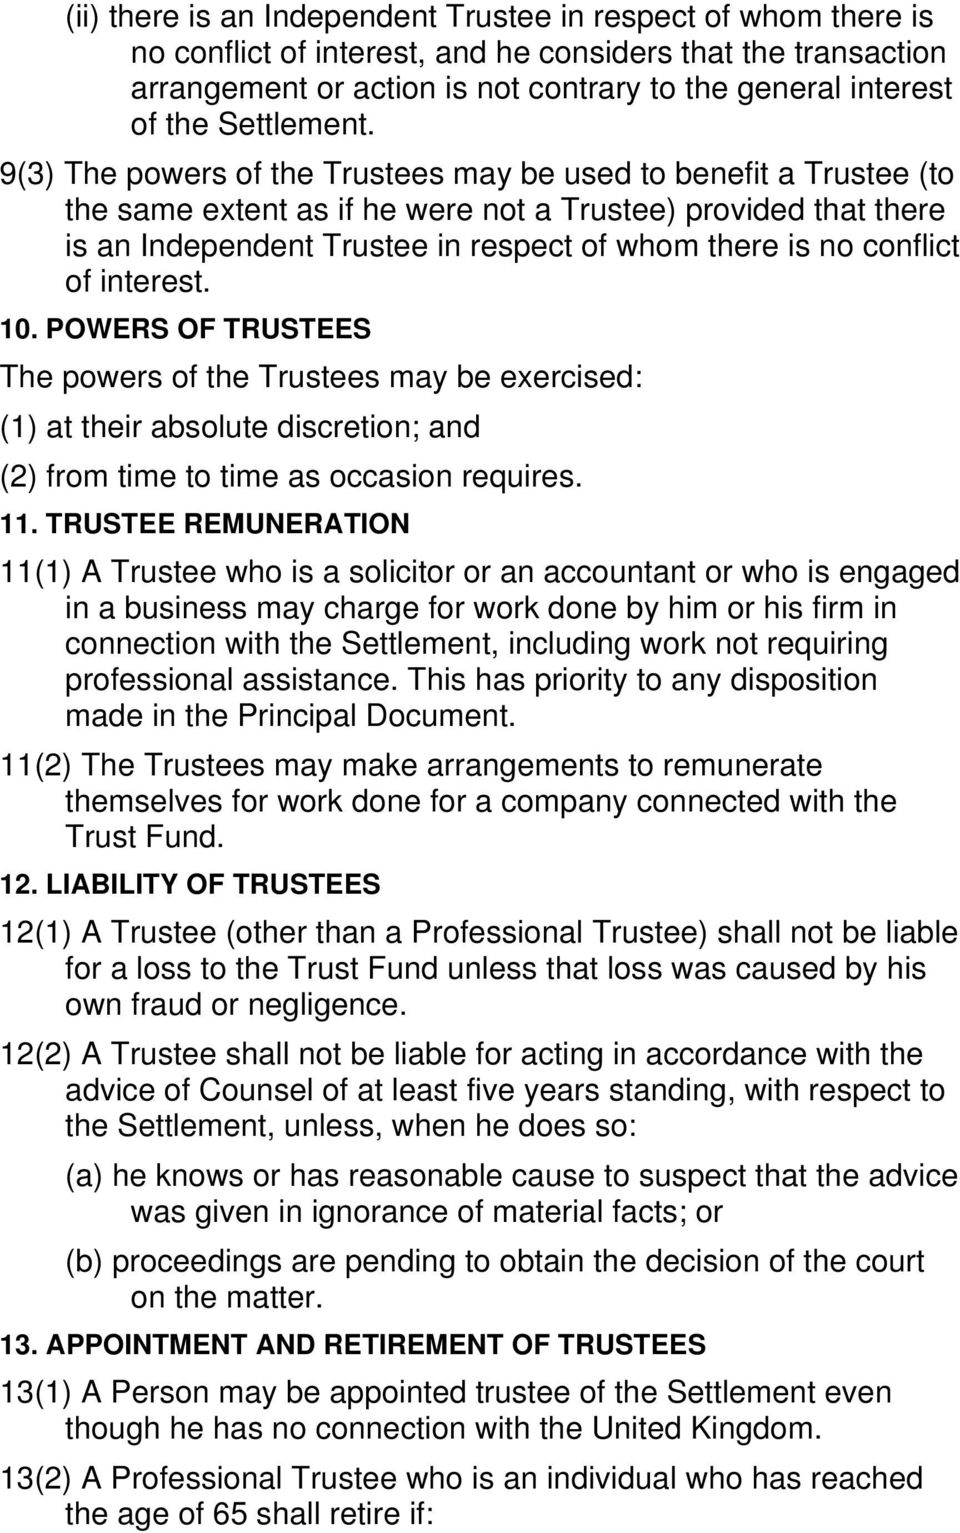 9(3) The powers of the Trustees may be used to benefit a Trustee (to the same extent as if he were not a Trustee) provided that there is an Independent Trustee in respect of whom there is no conflict